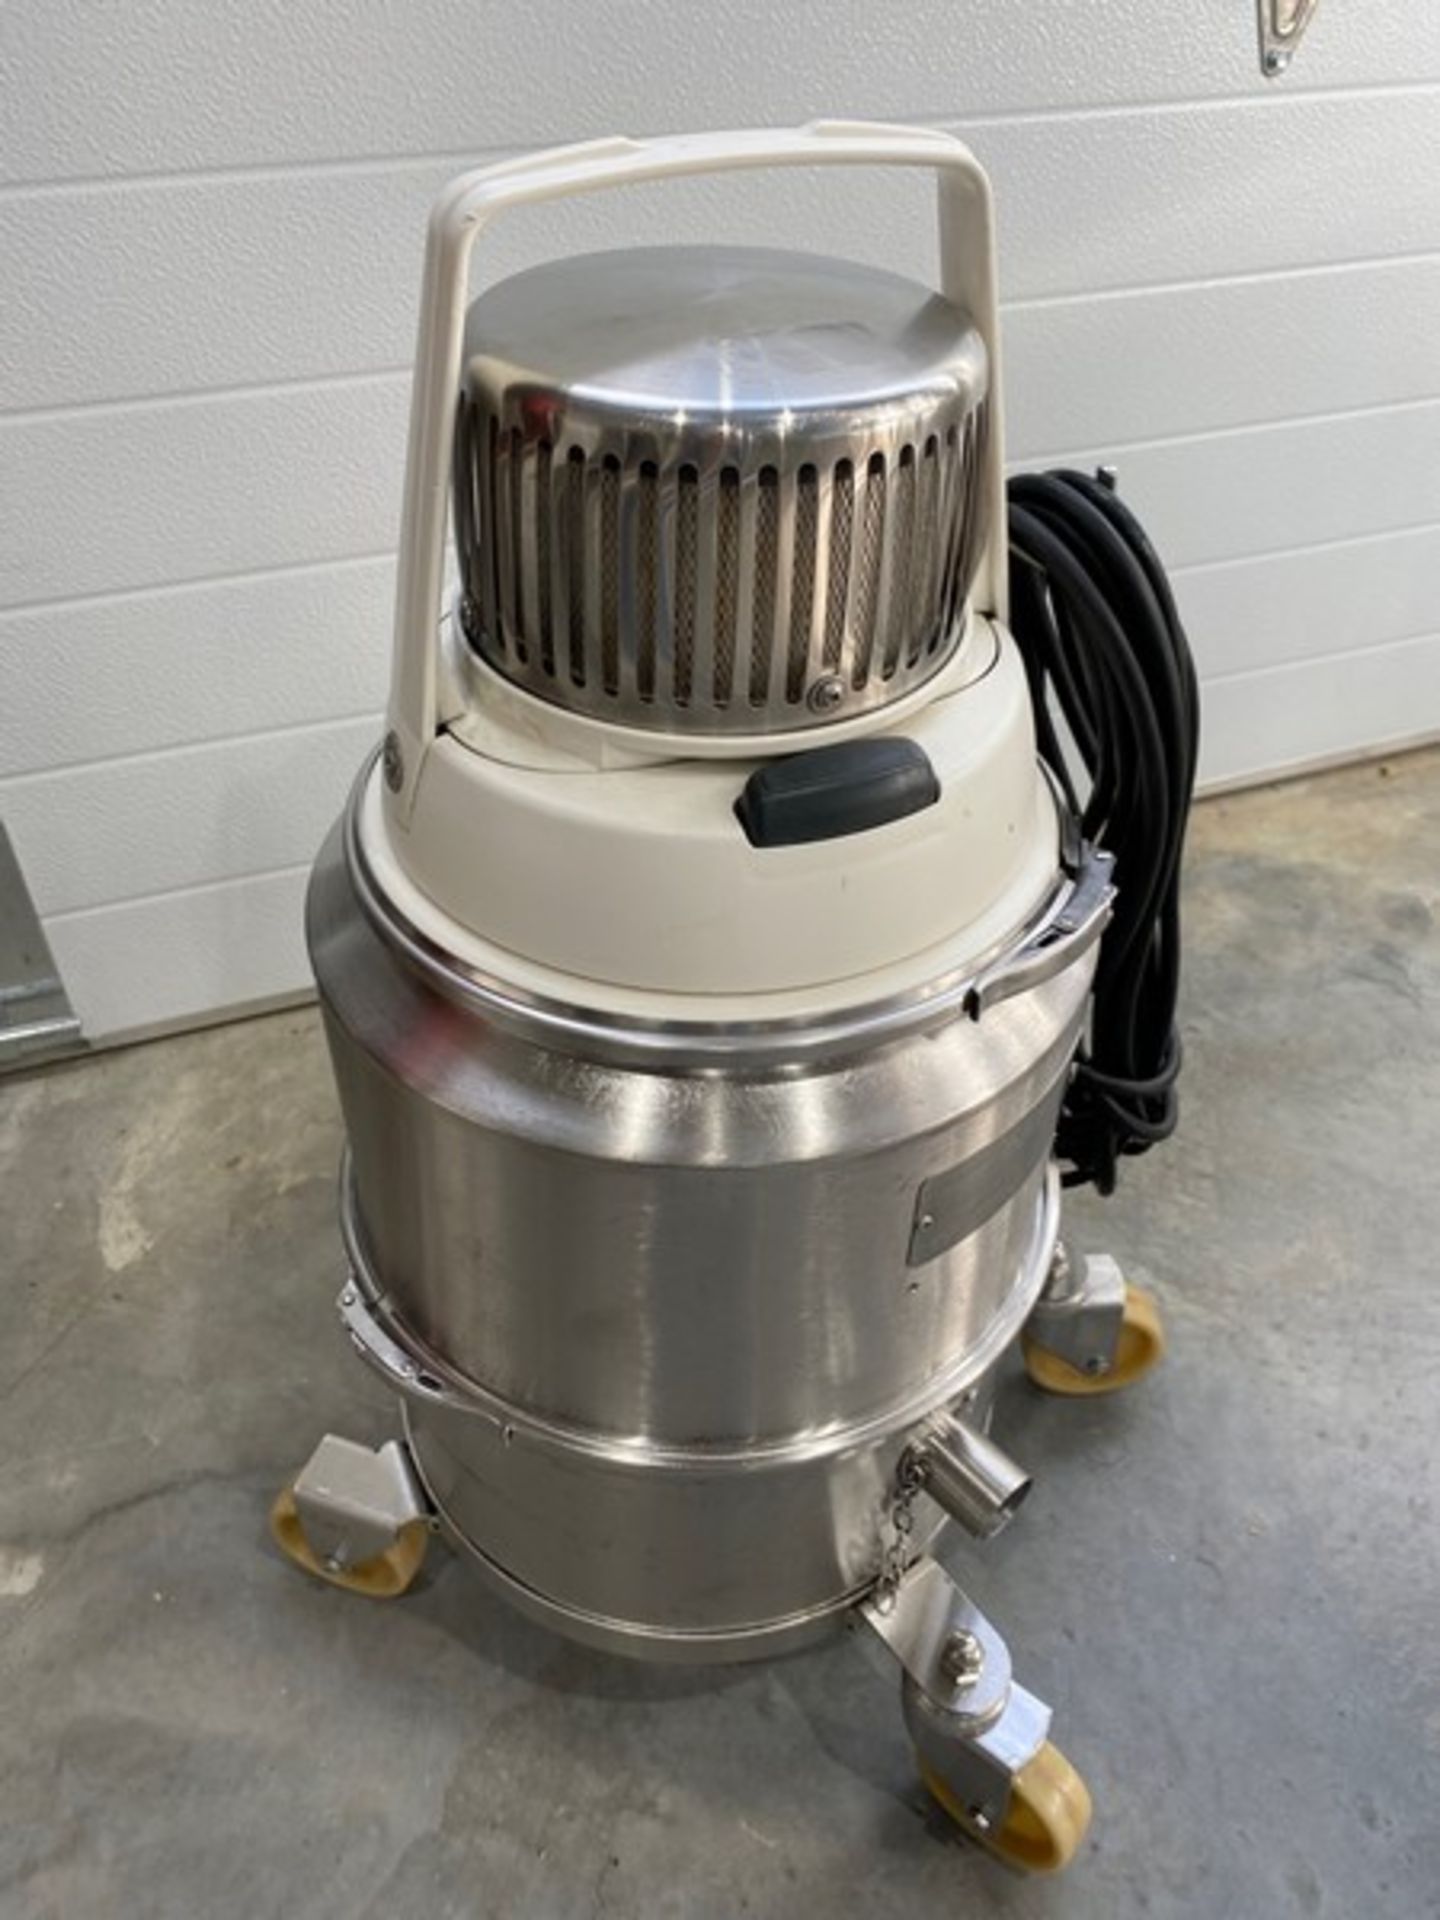 Nilfisk Critical Area Stainless Steel Vacuums. Model: IVT/1000CR, Vacuum has been run tested, As - Image 2 of 3